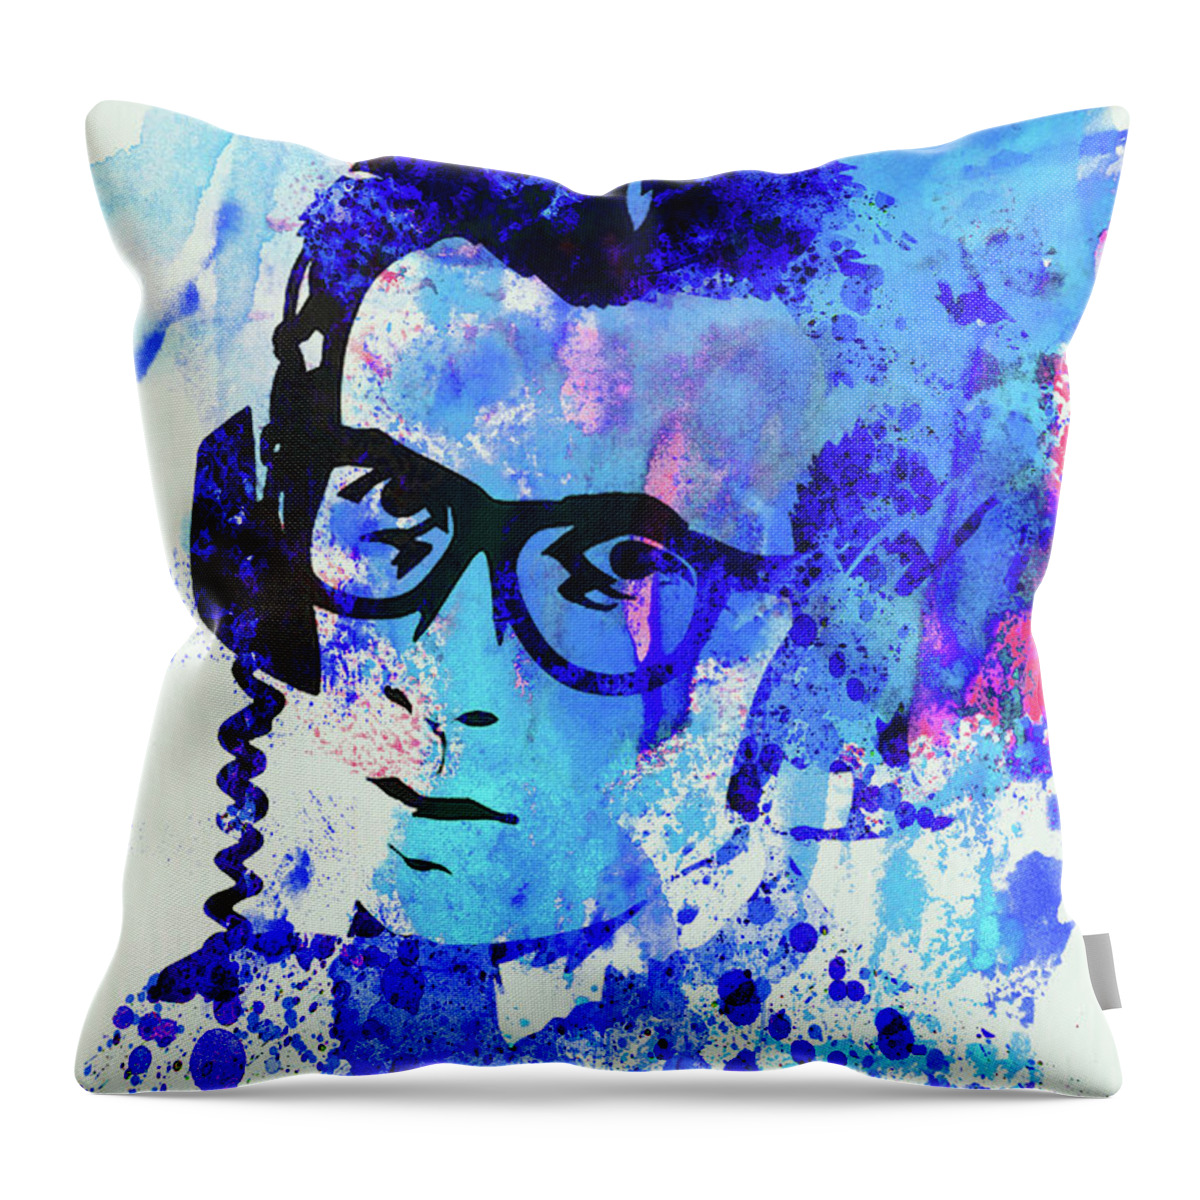 Elvis Costello Throw Pillow featuring the mixed media Legendary Elvis Costello Watercolor by Naxart Studio